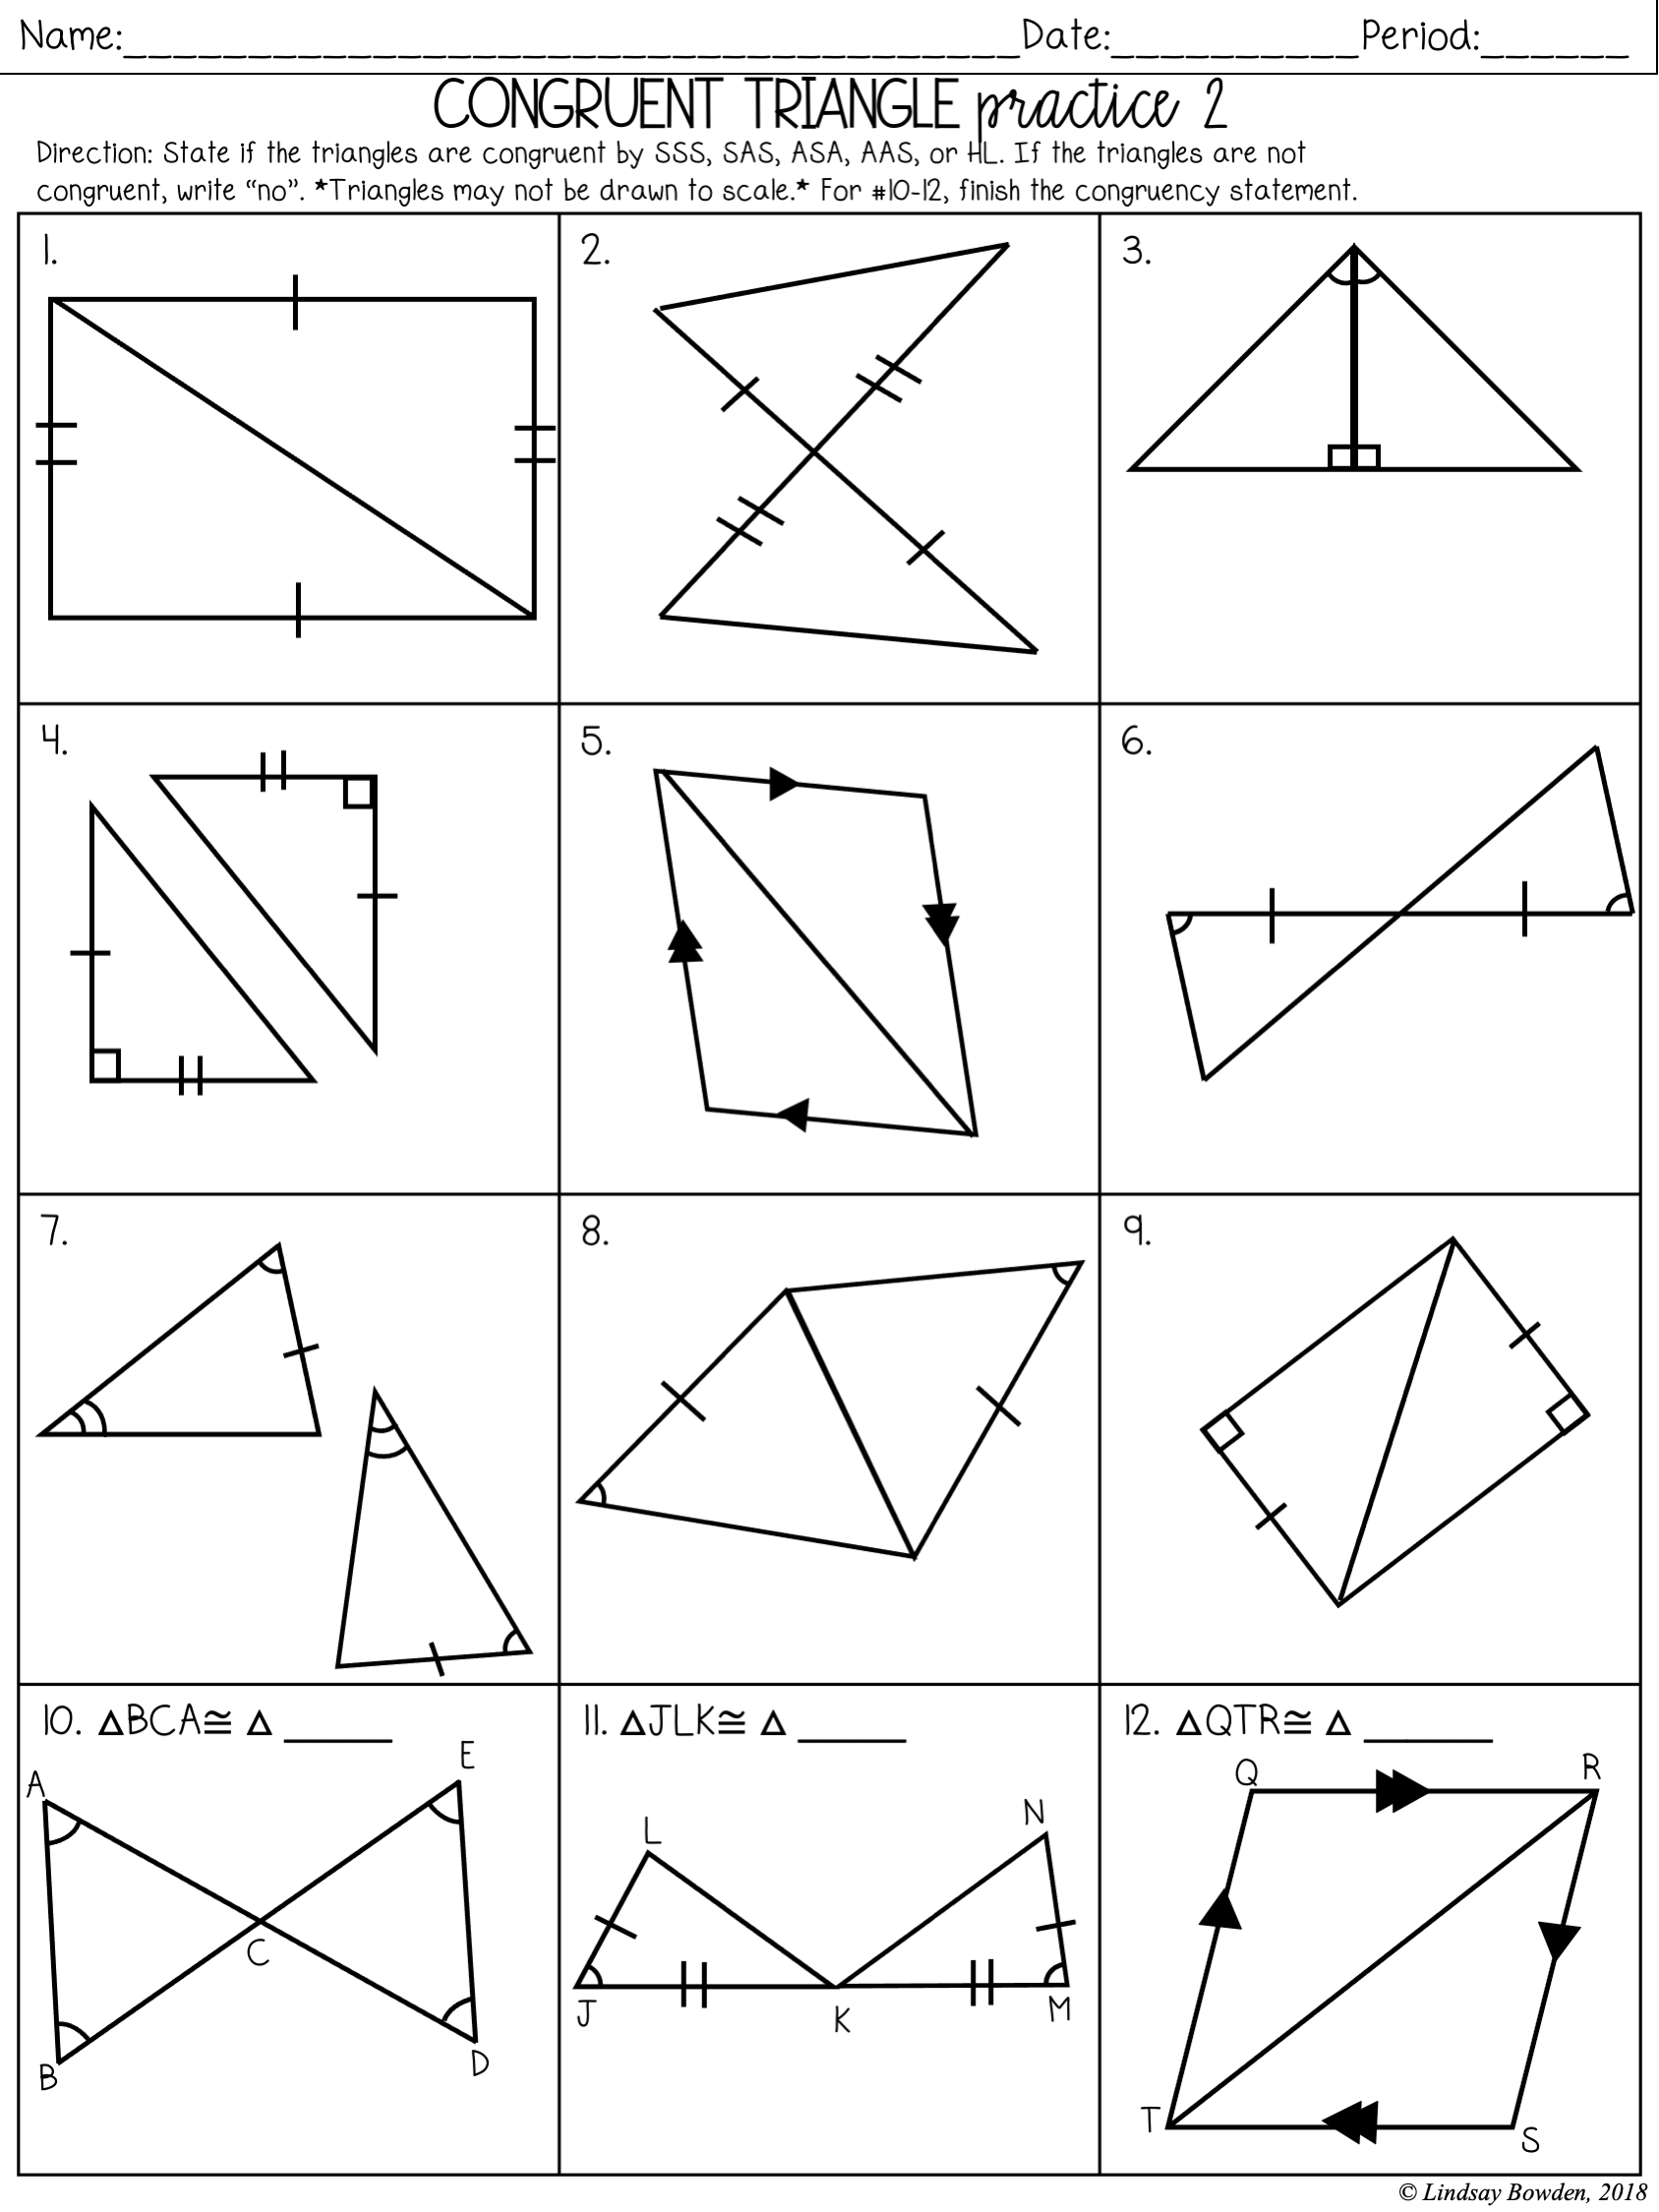 Congruent Triangles Notes and Worksheets - Lindsay Bowden Intended For Congruent Triangles Worksheet With Answer